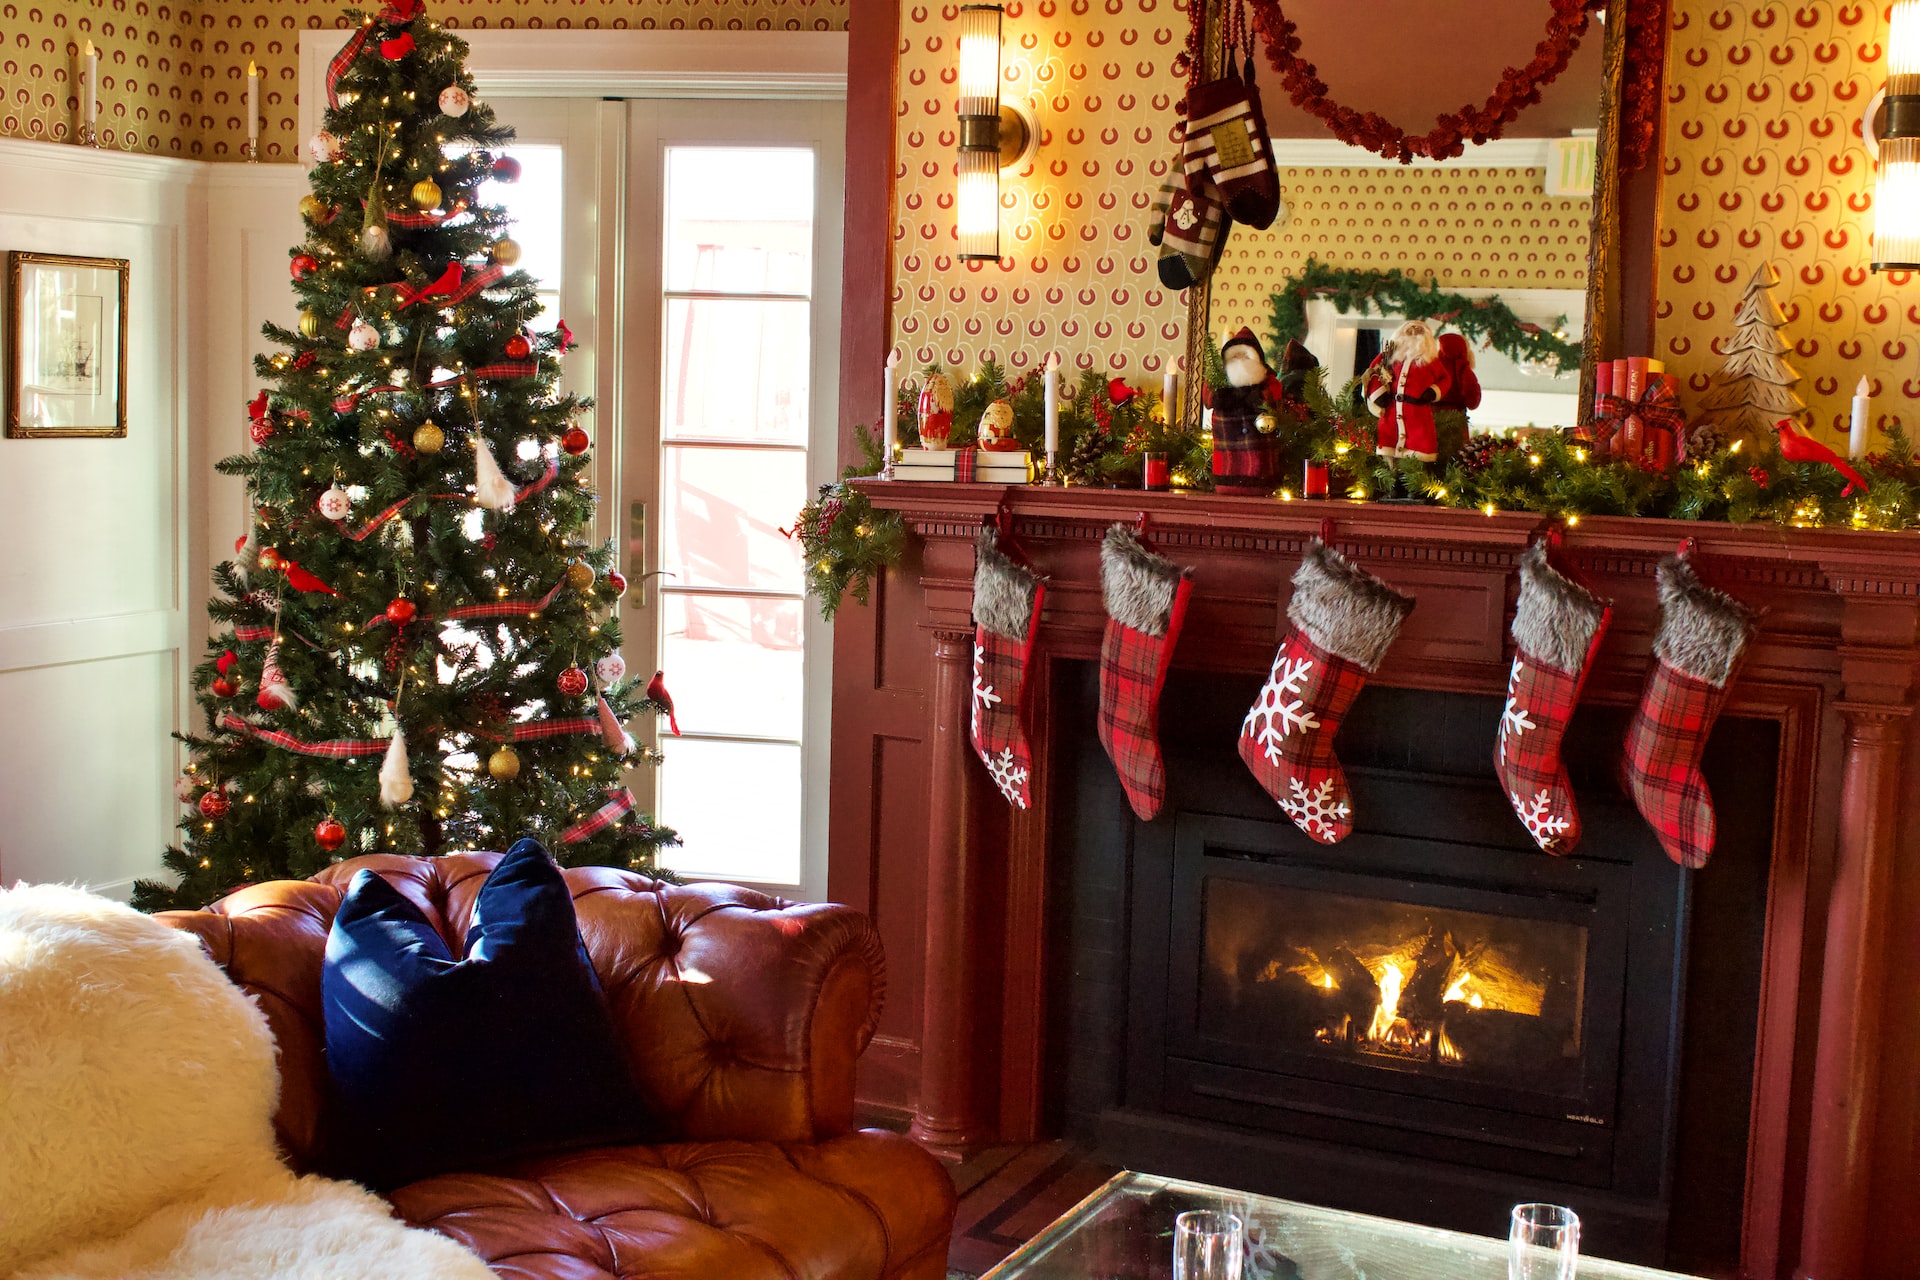 Living Room with Christmas Tree and Stocking Hanging over the Fireplace